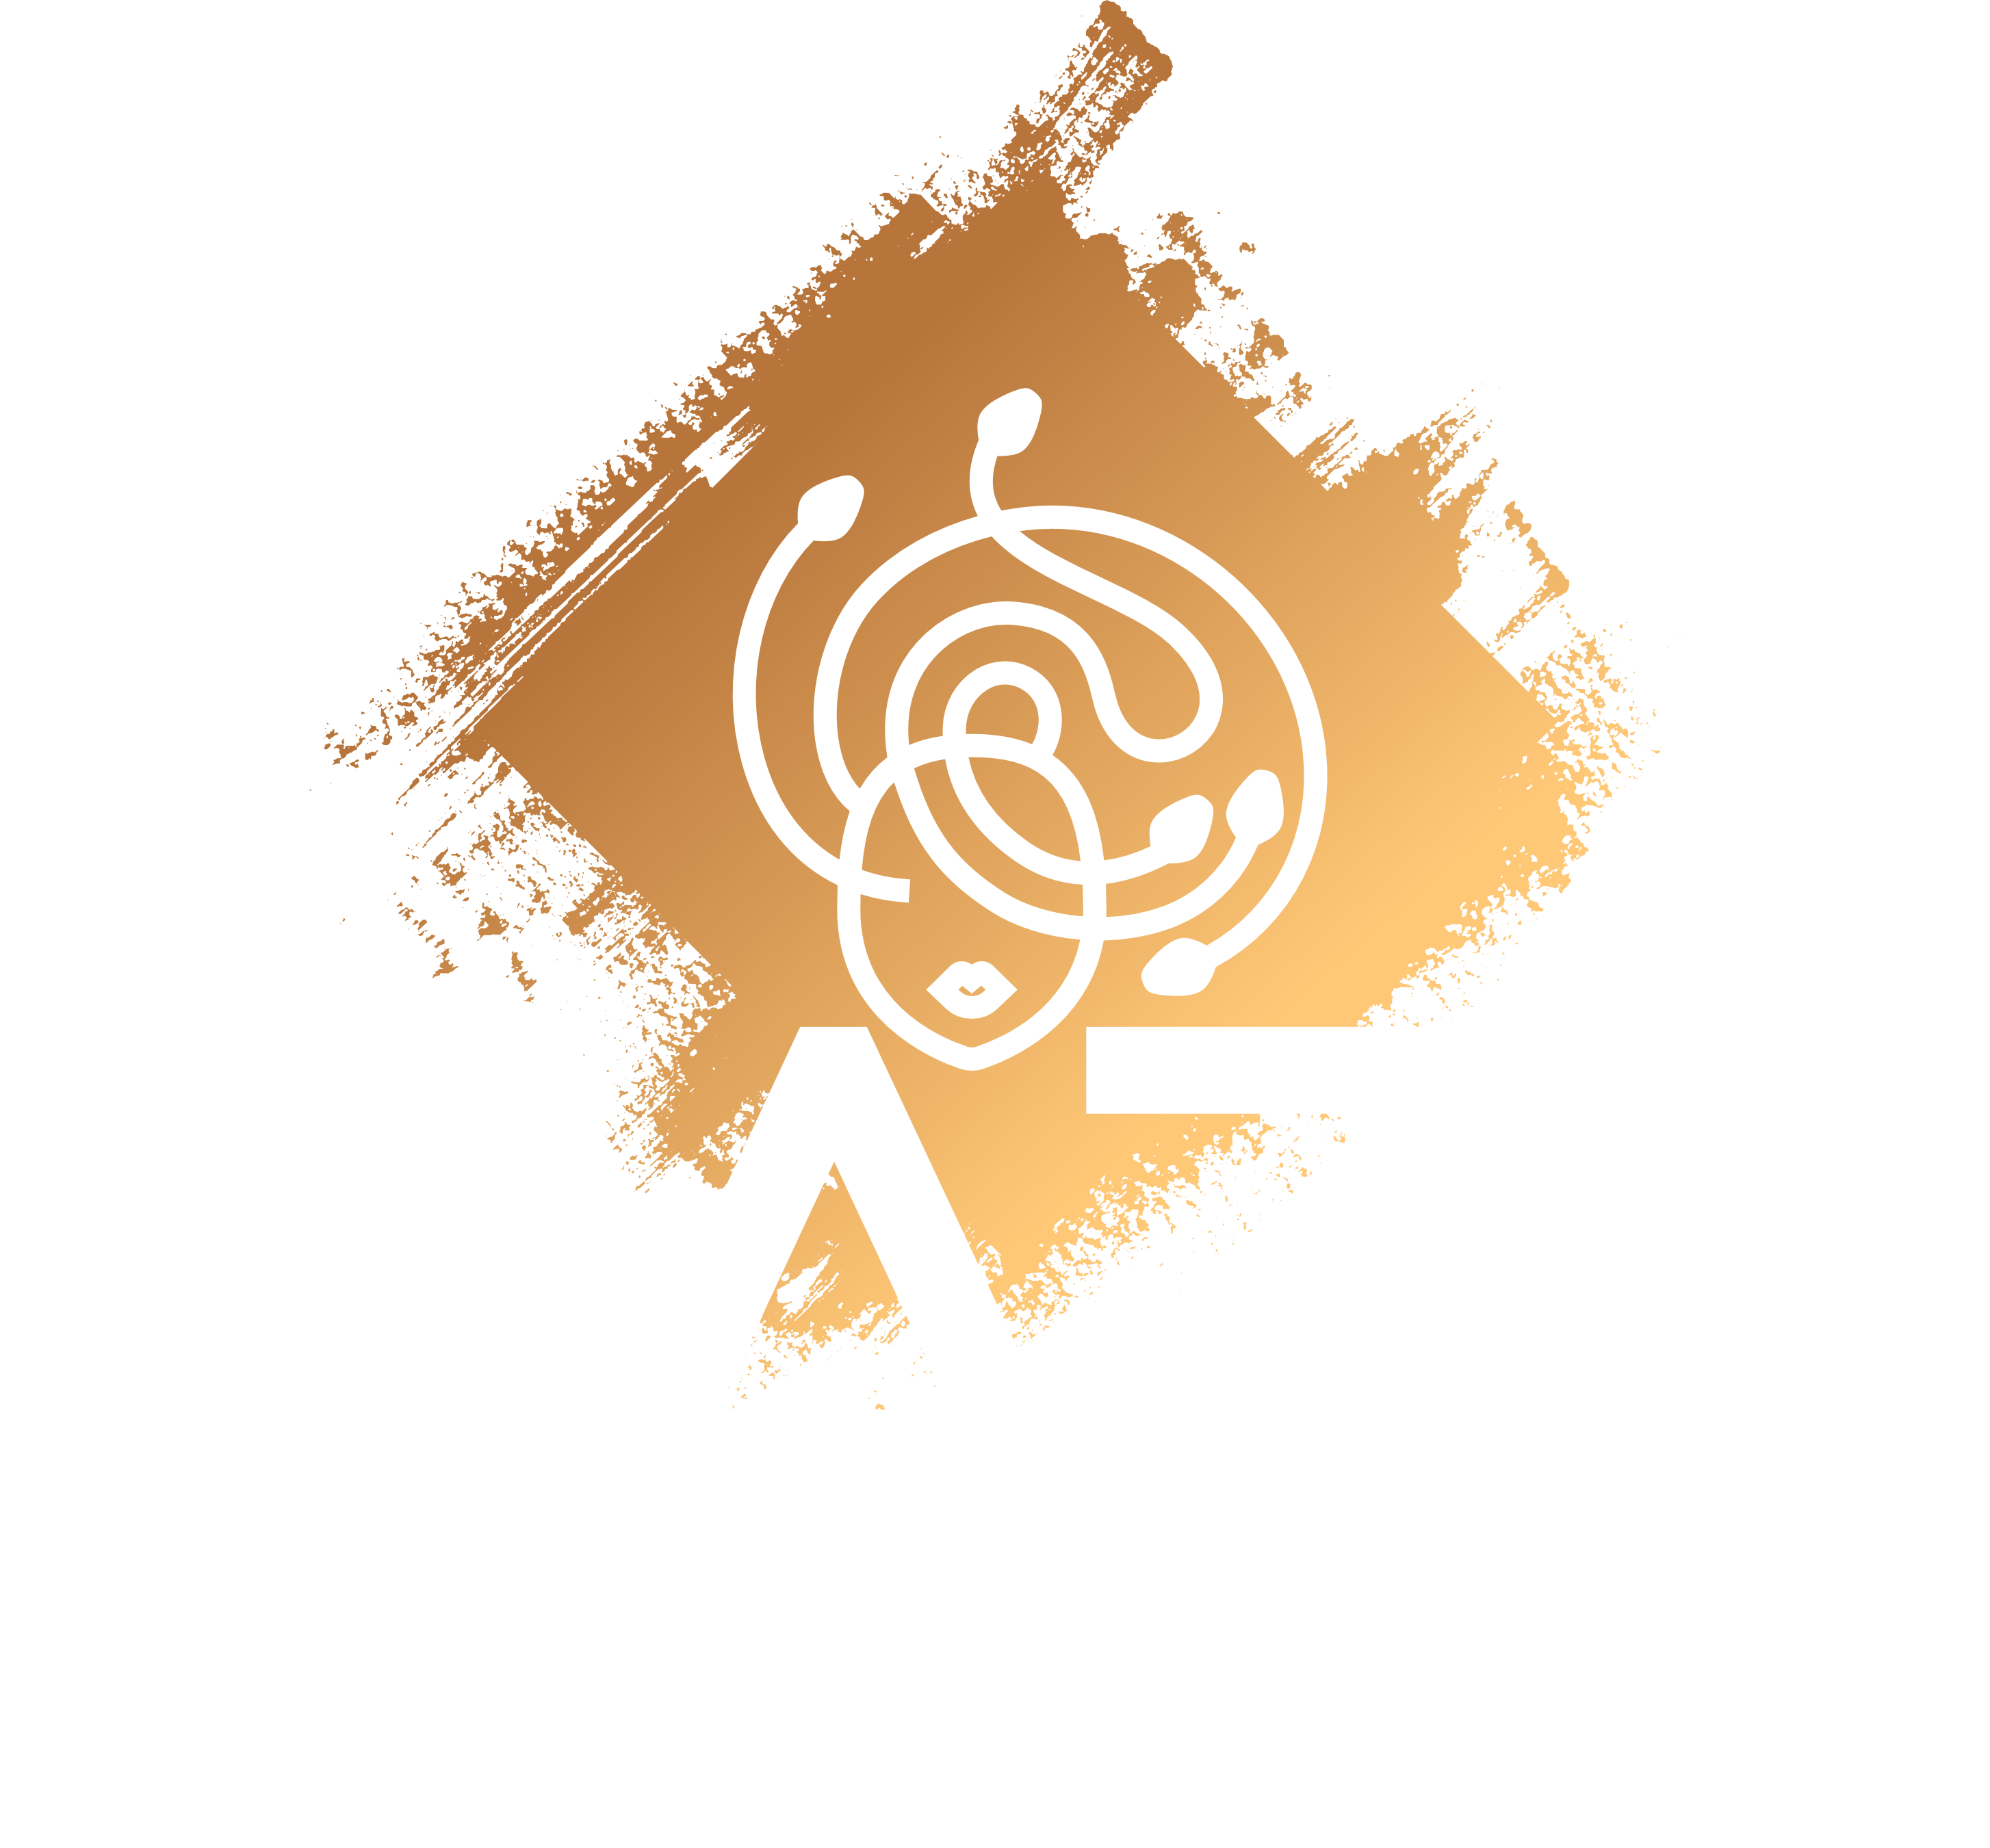 The Best Hair Salon in the Spokane Area! | Jaazz Hairdressing Group -  Spokane's Best Salon - Haircuts, Color, Extensions, Wigs